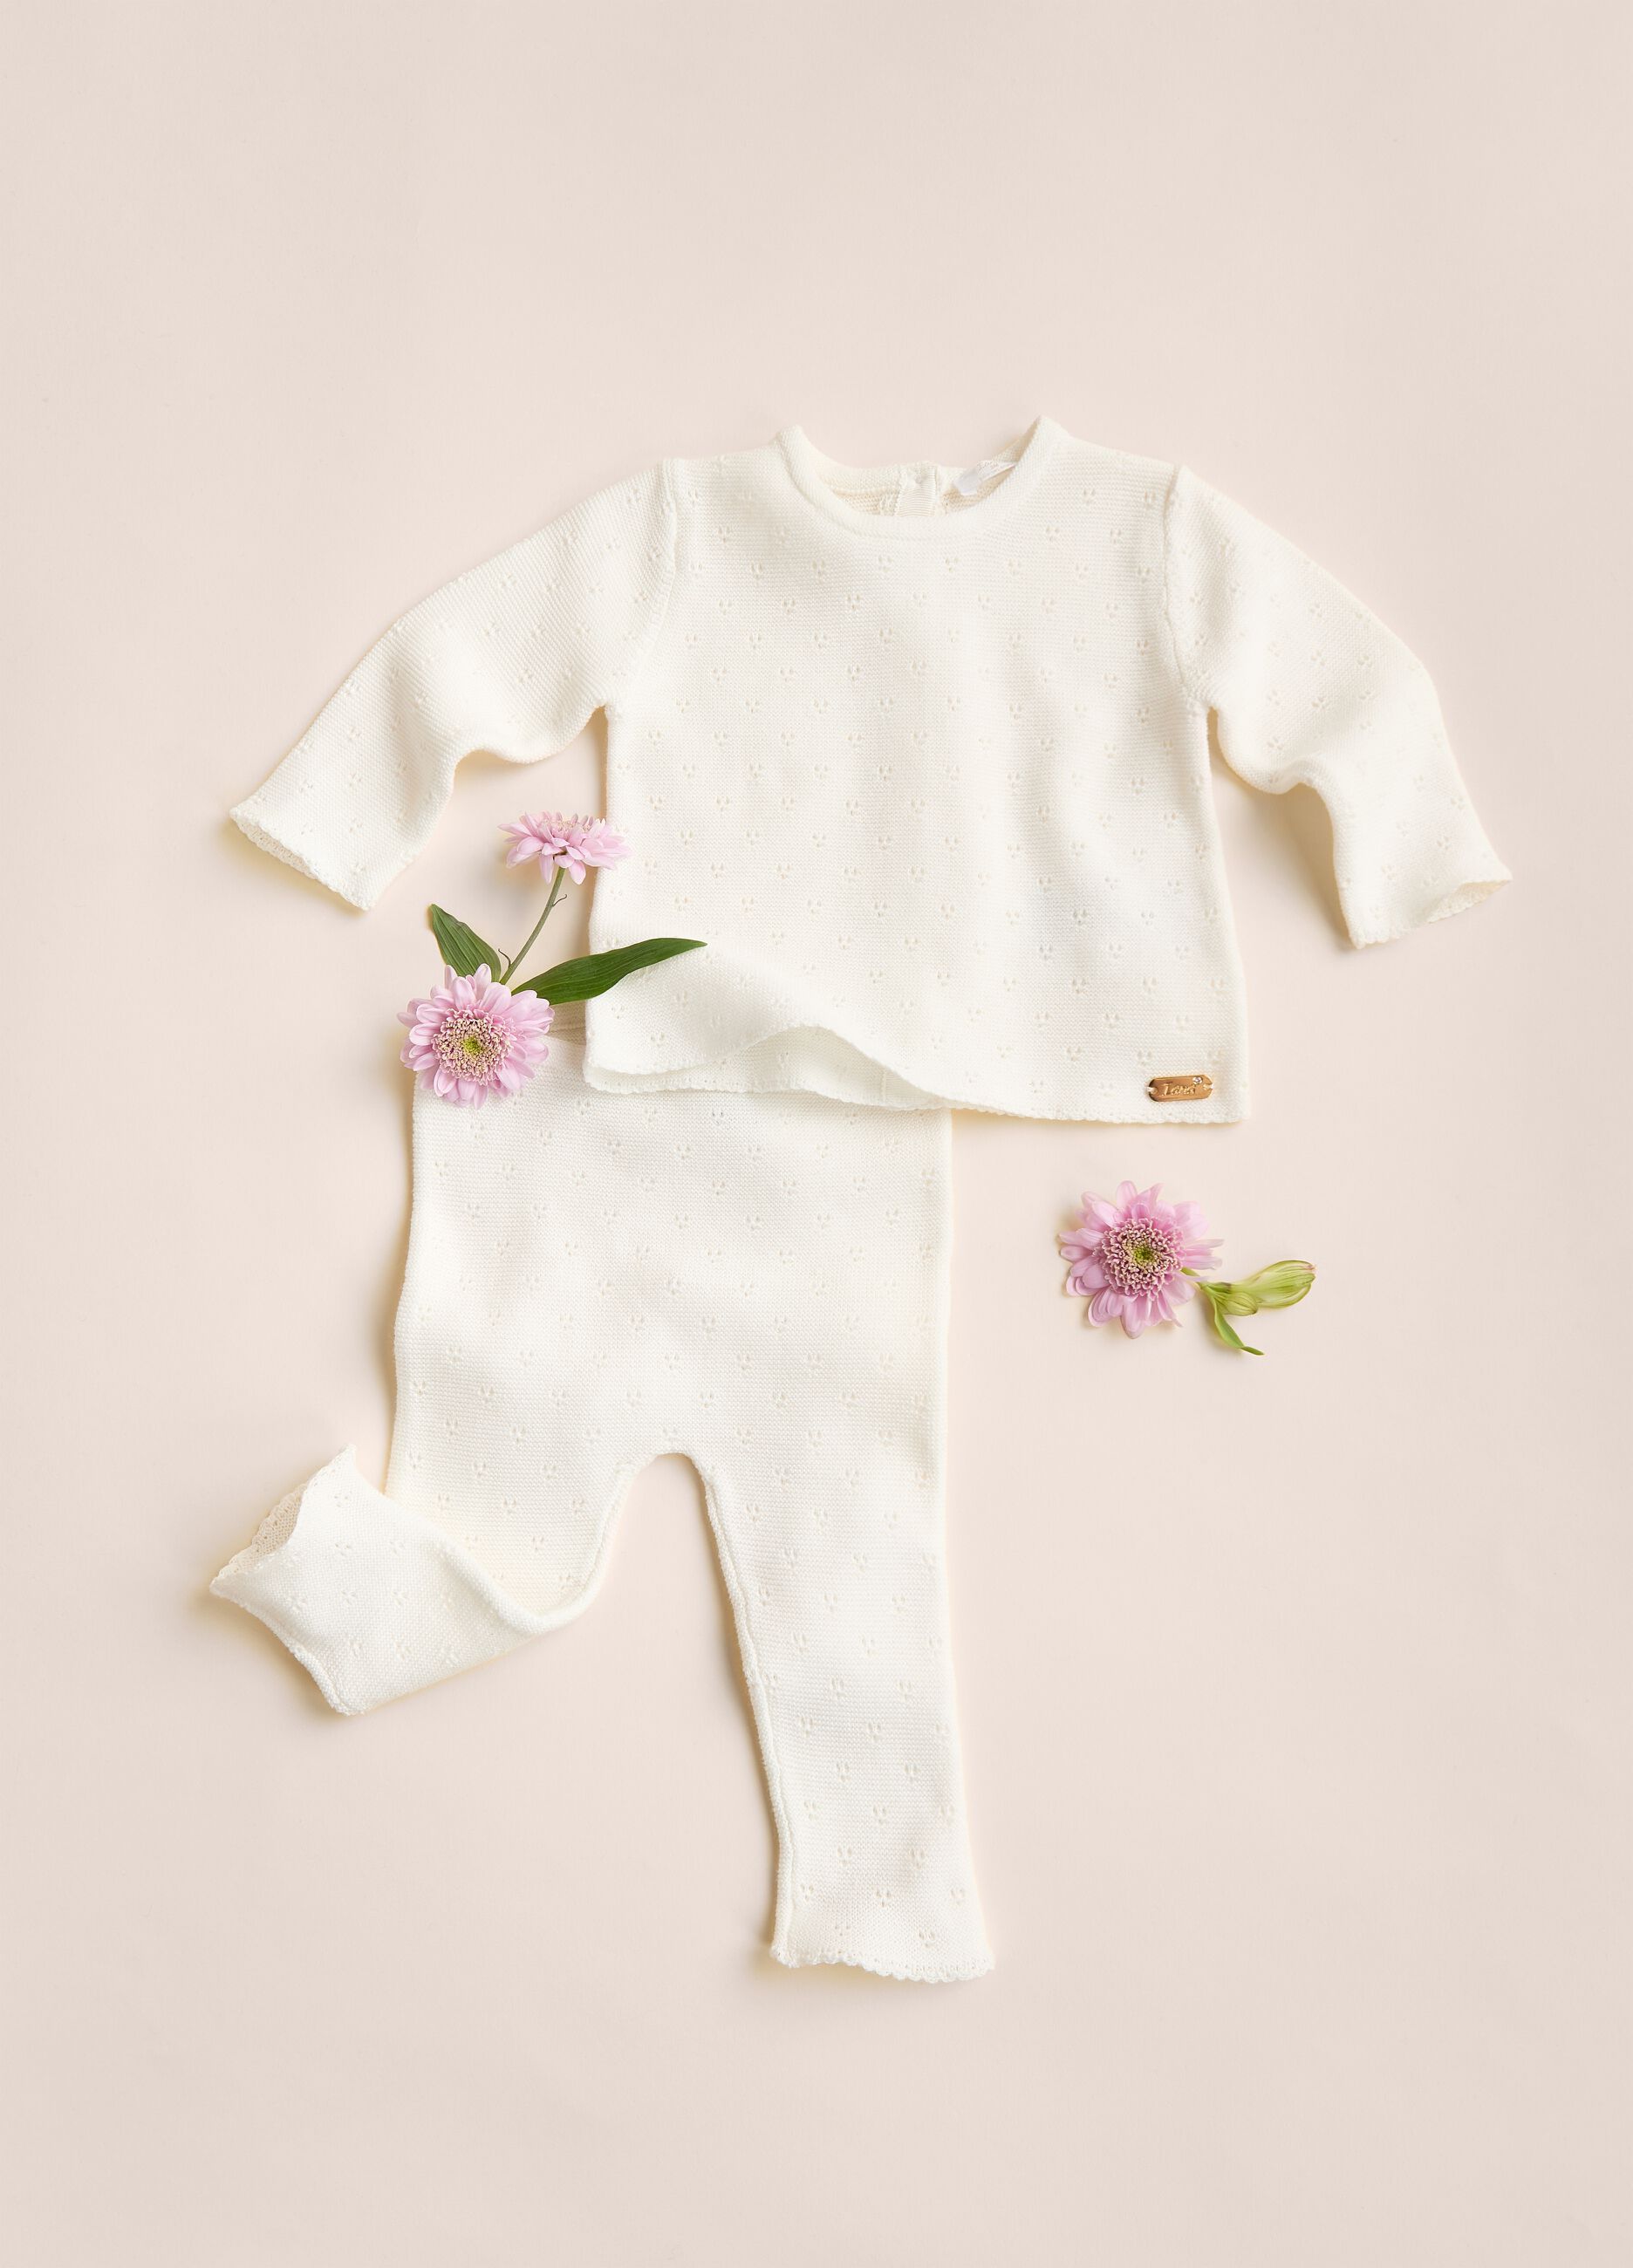 IANA 100% organic cotton outfit with openwork design.